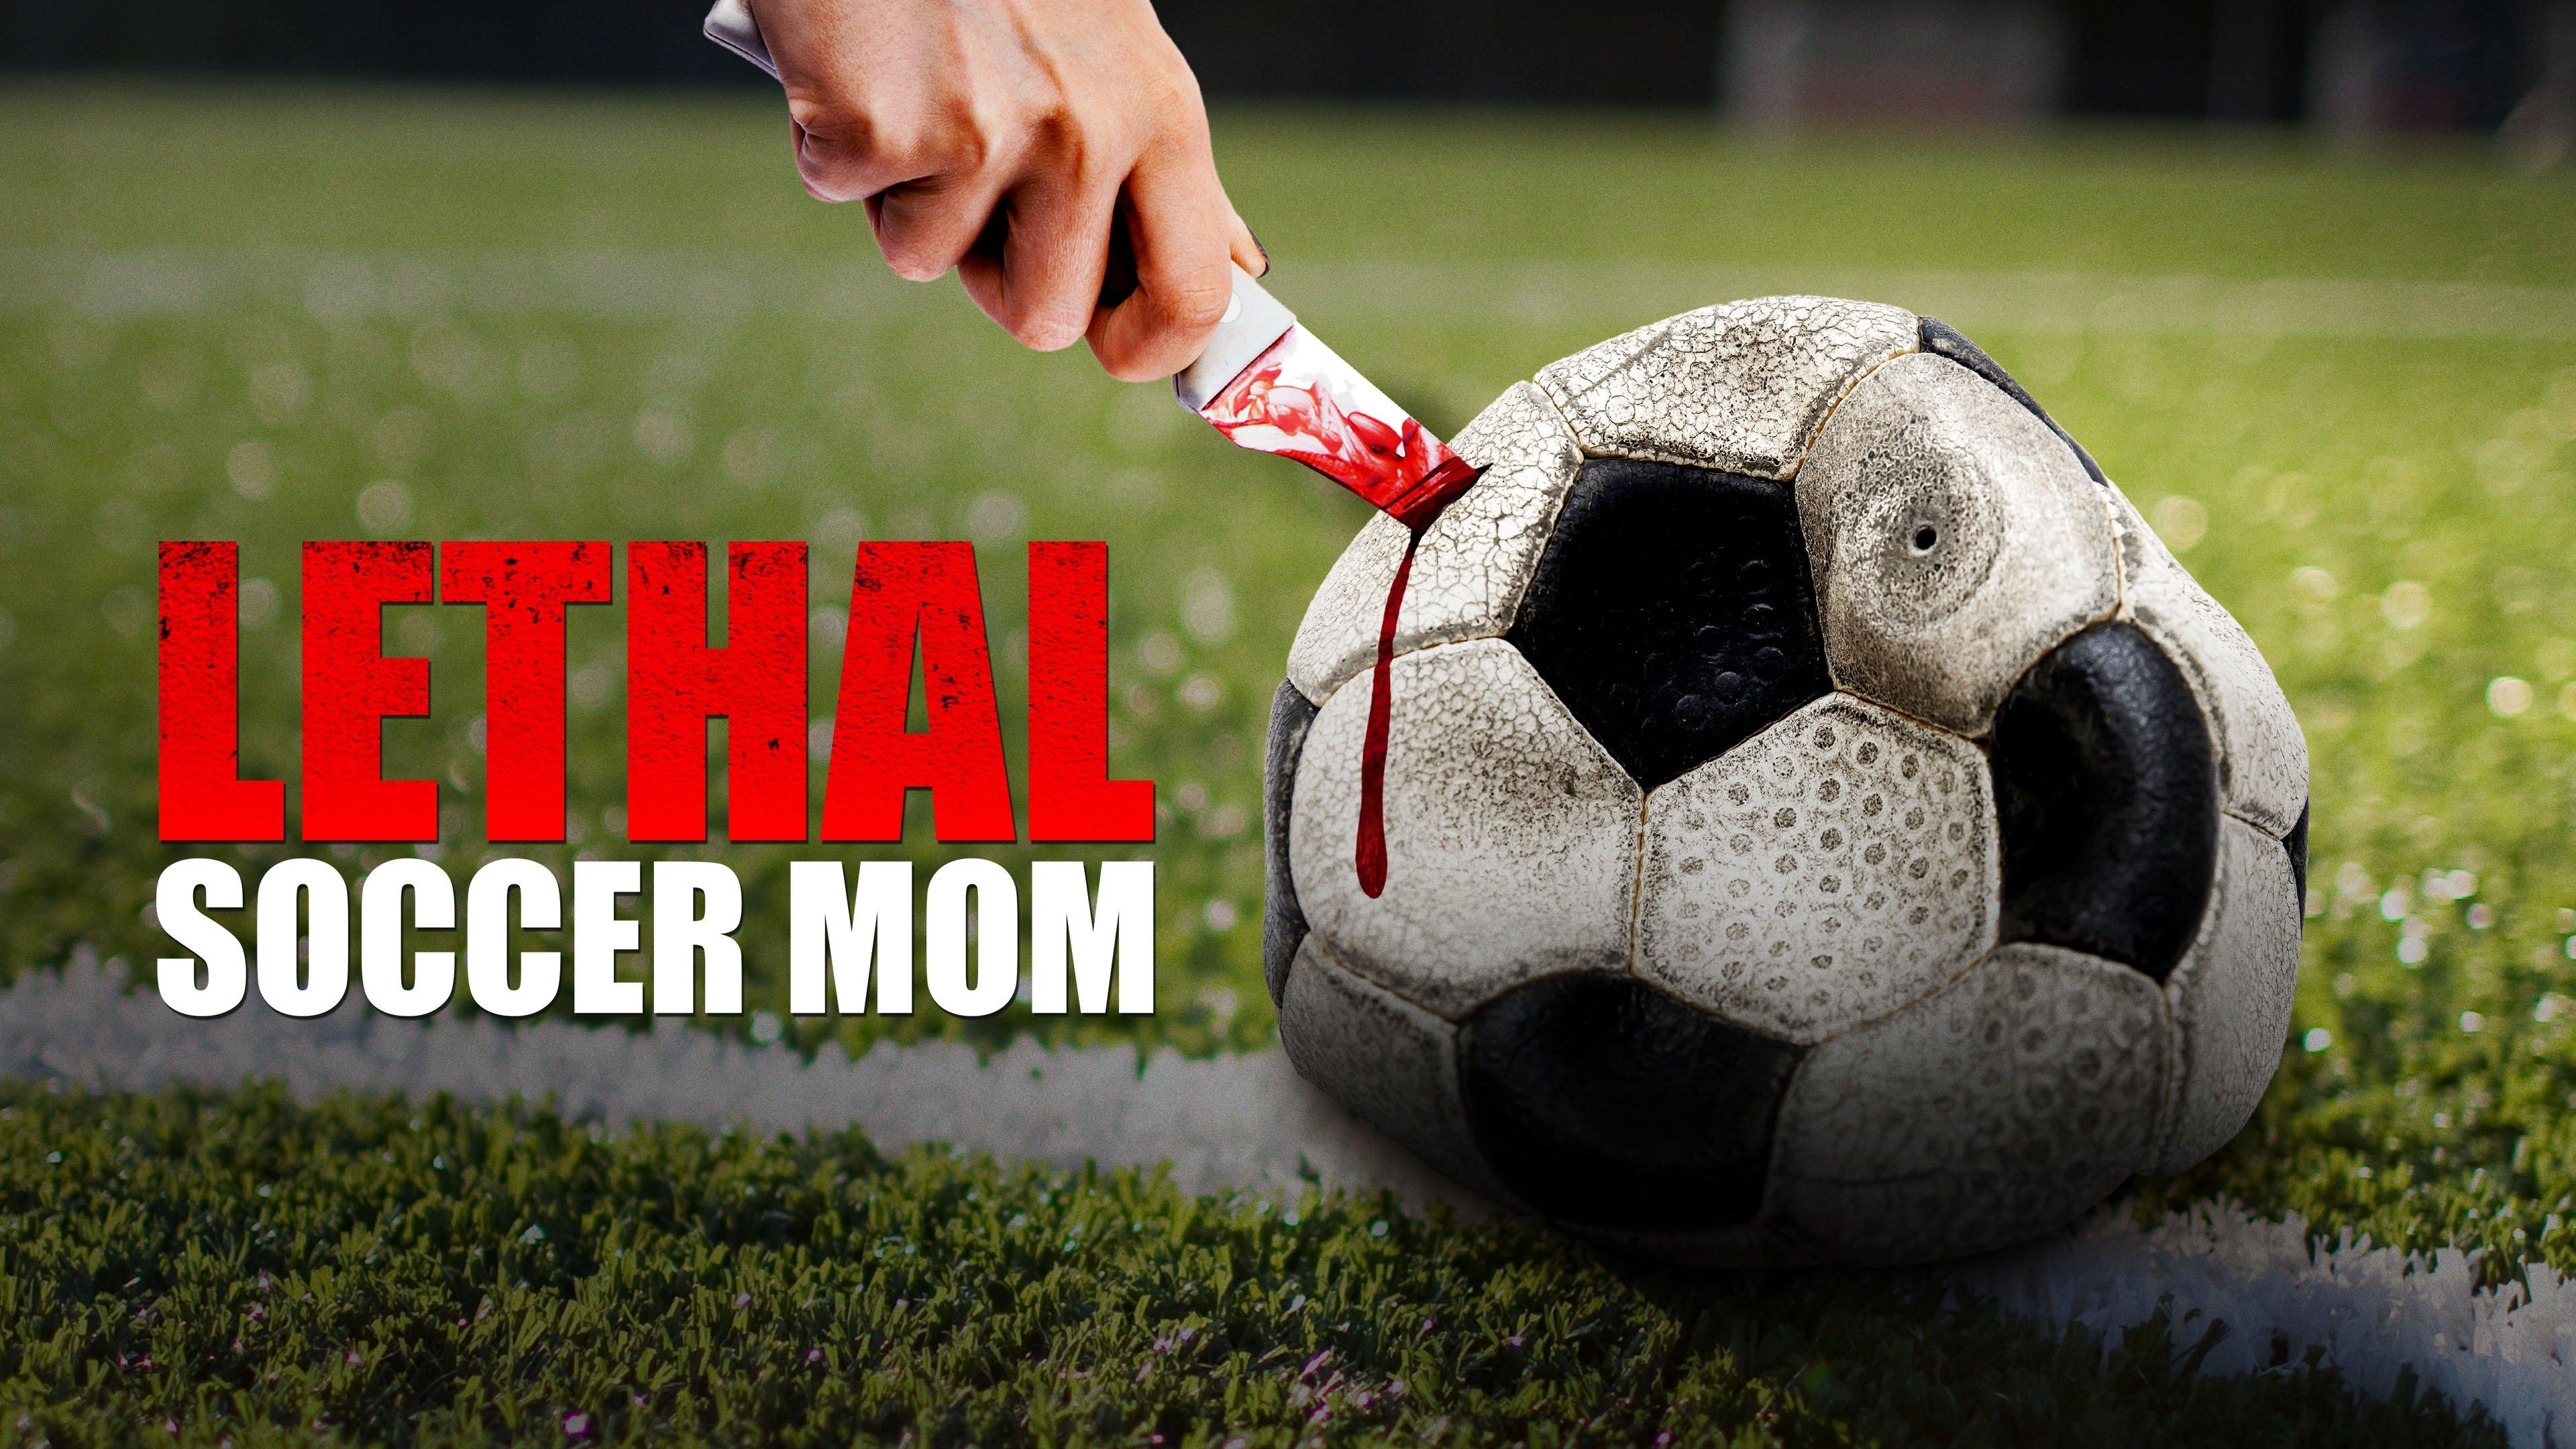 Watch Lethal Soccer Mom Streaming Online on Philo (Free Trial)